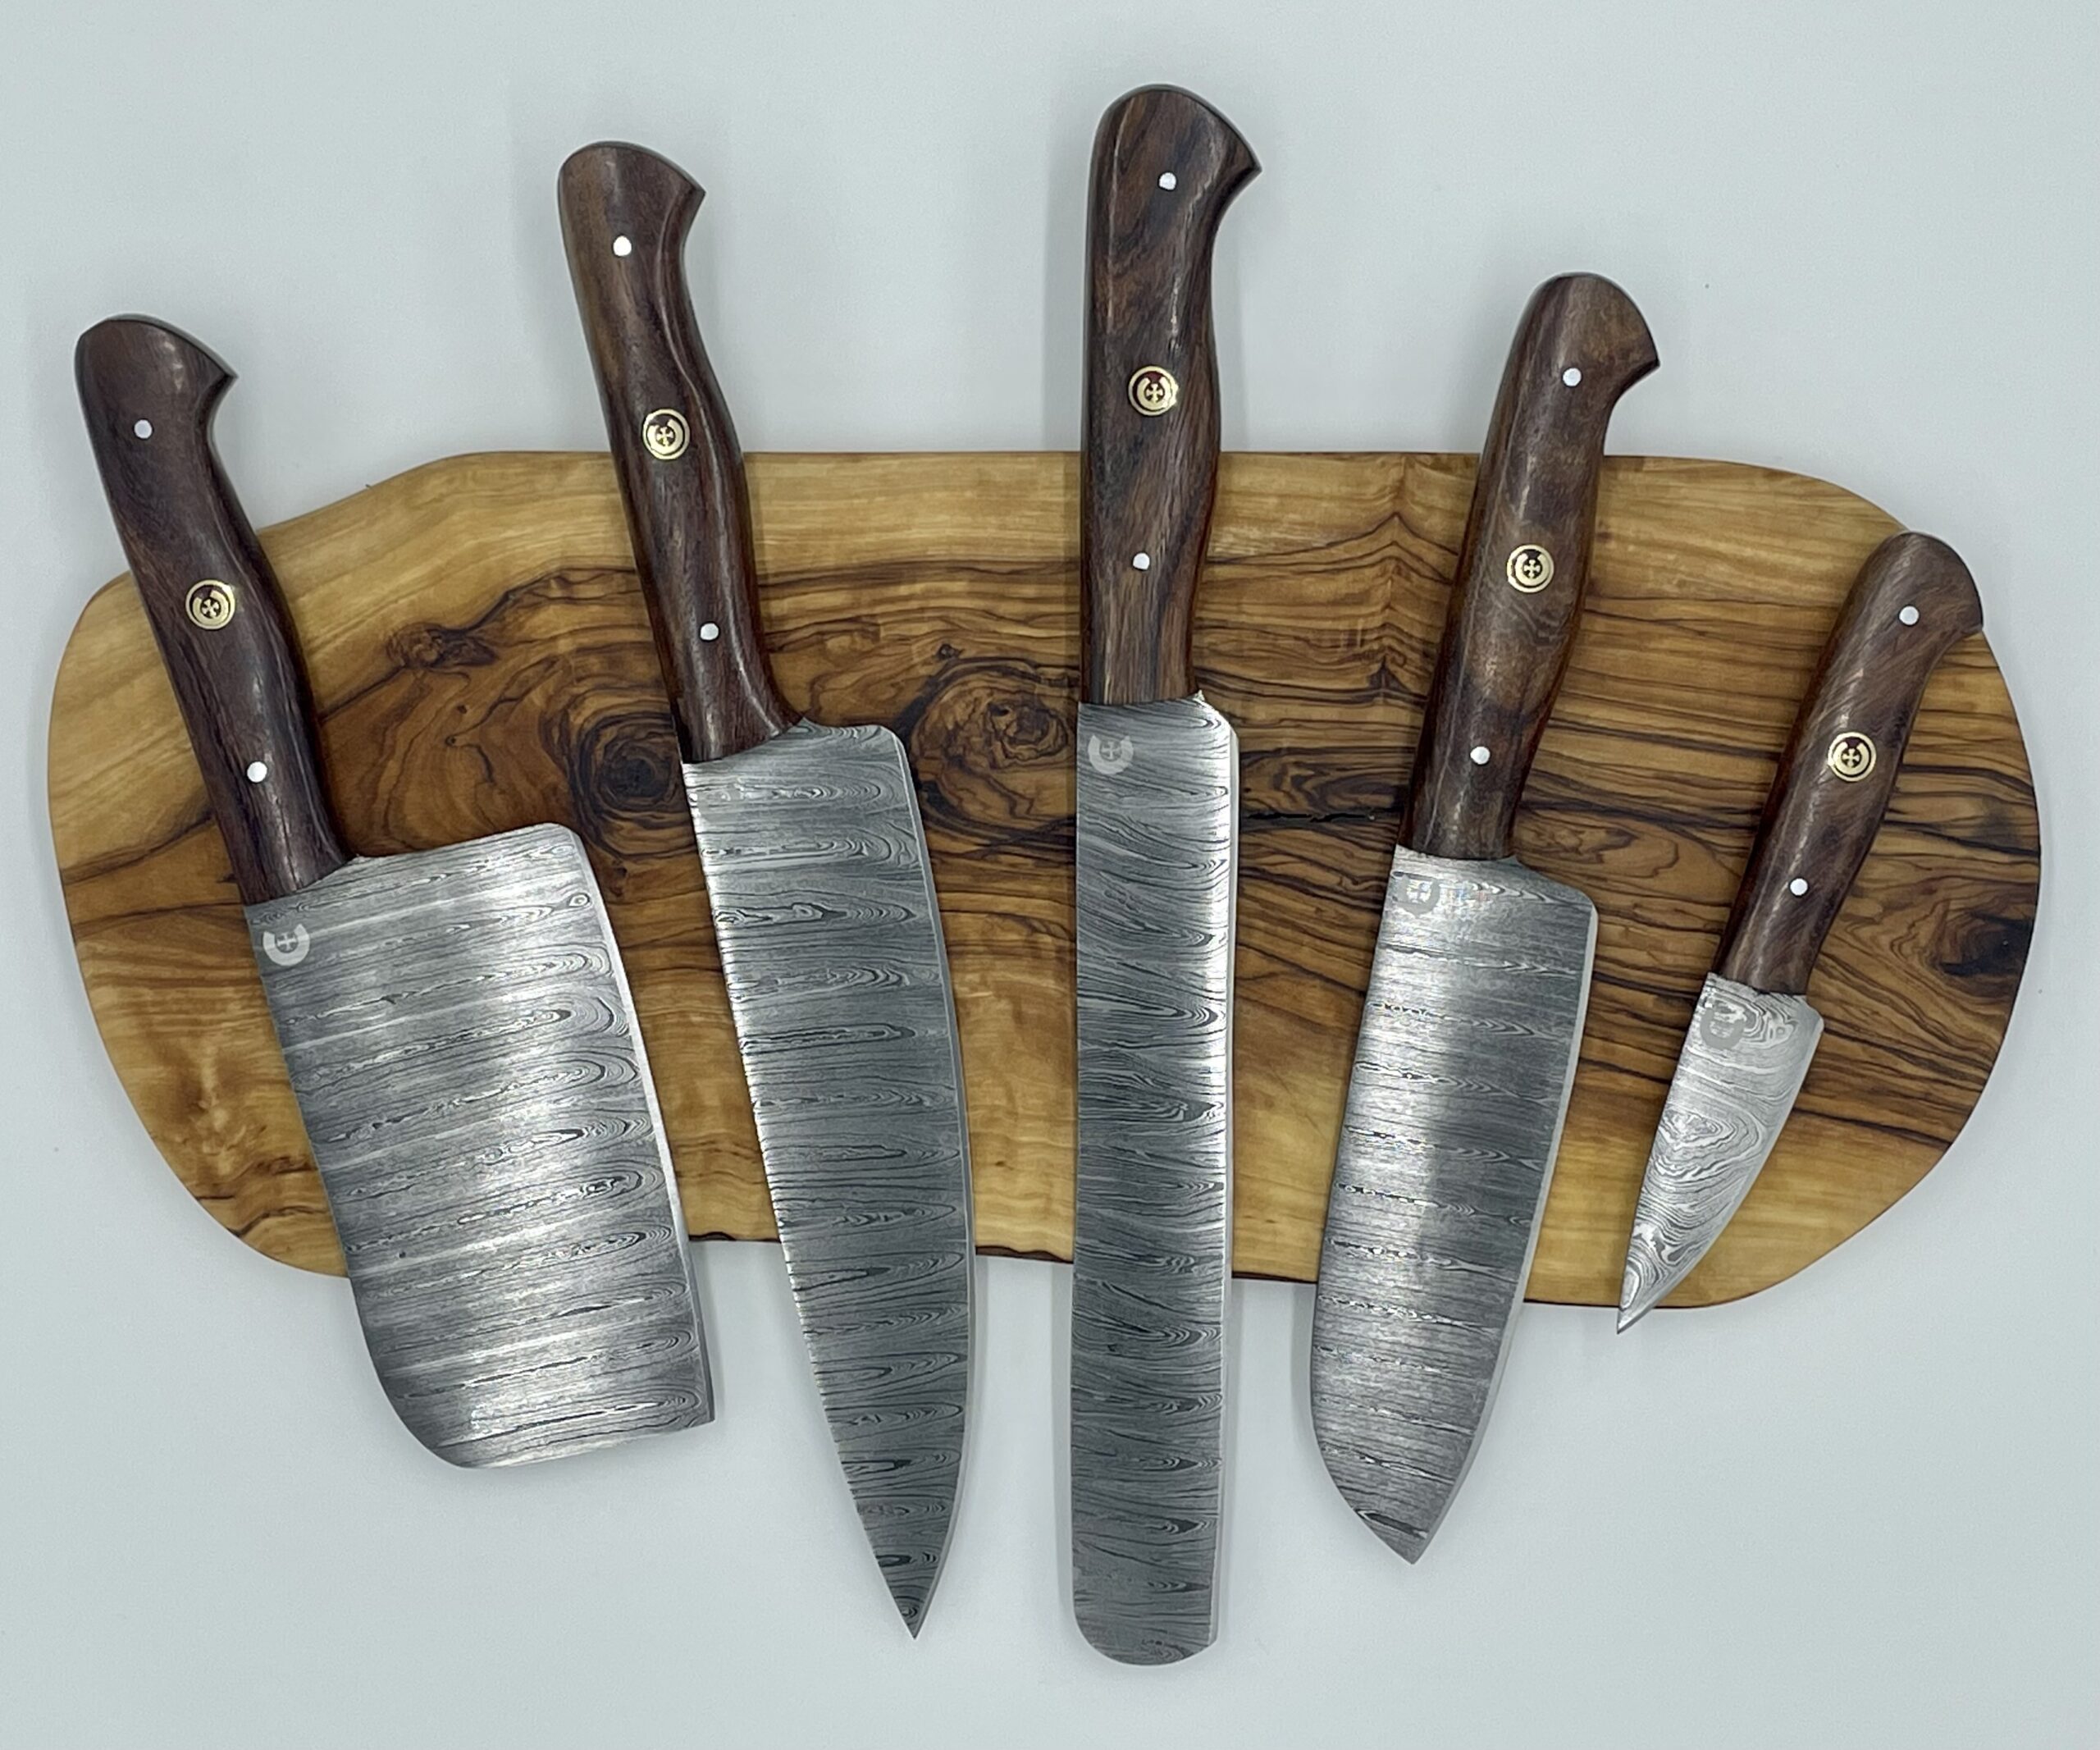 https://templarschoice.com/wp-content/uploads/2023/01/Damascus-Chef-Knives-with-Rosewood-Handles-5-Knife-Set-1-scaled.jpg